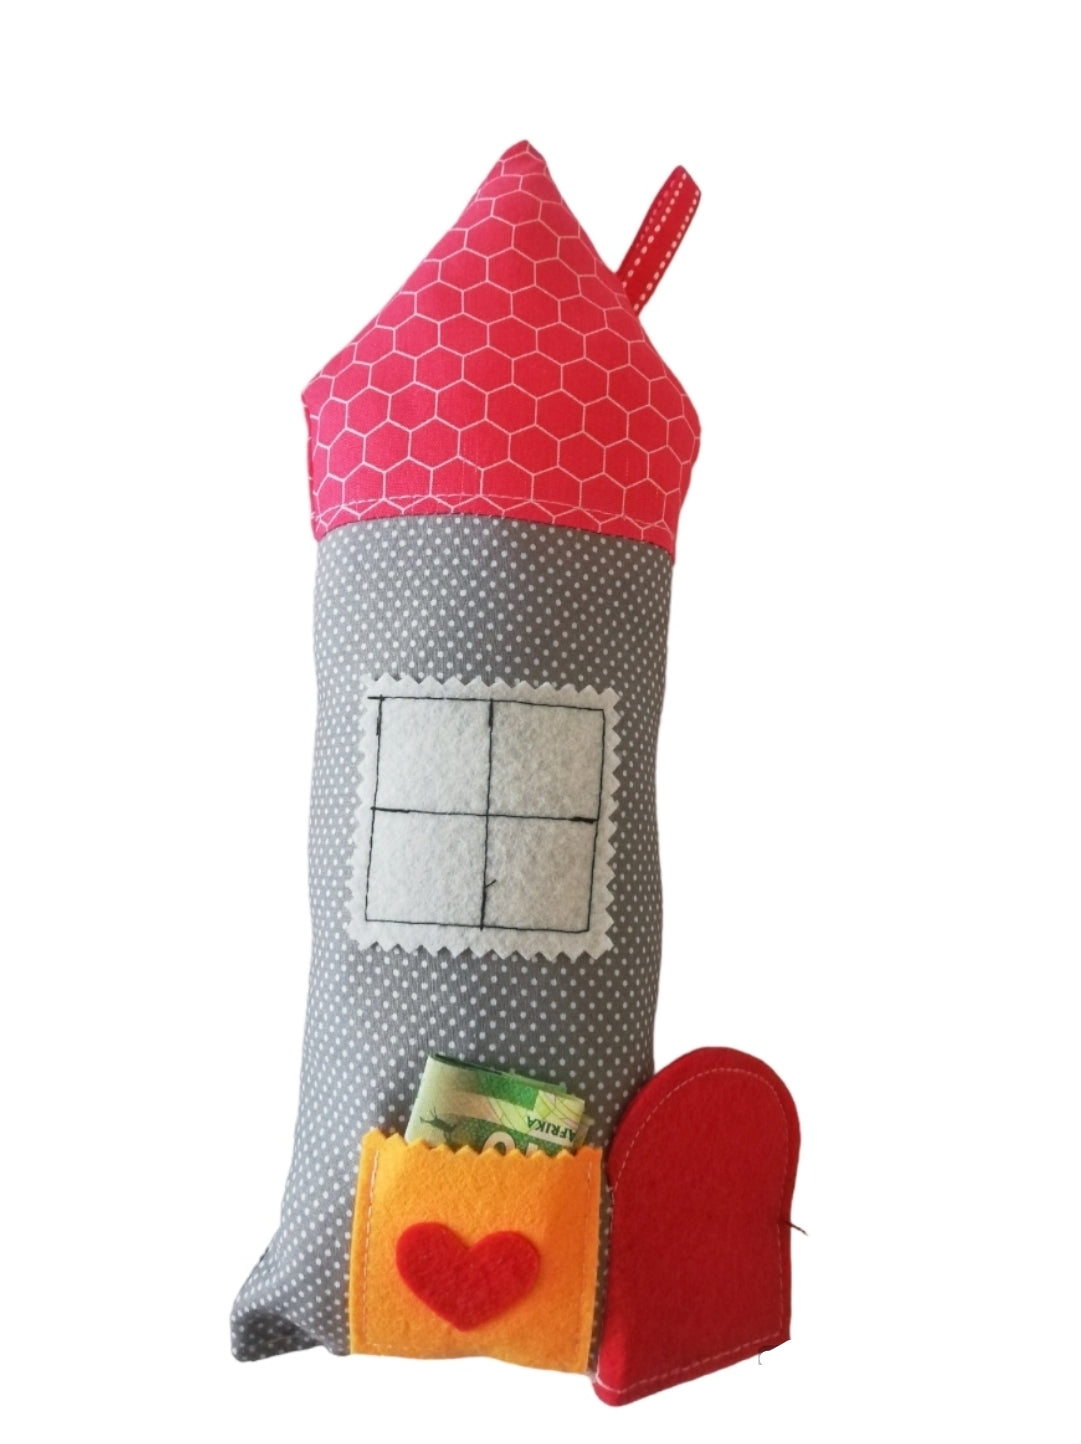 Tooth Fairy House Pillow - Red and Grey